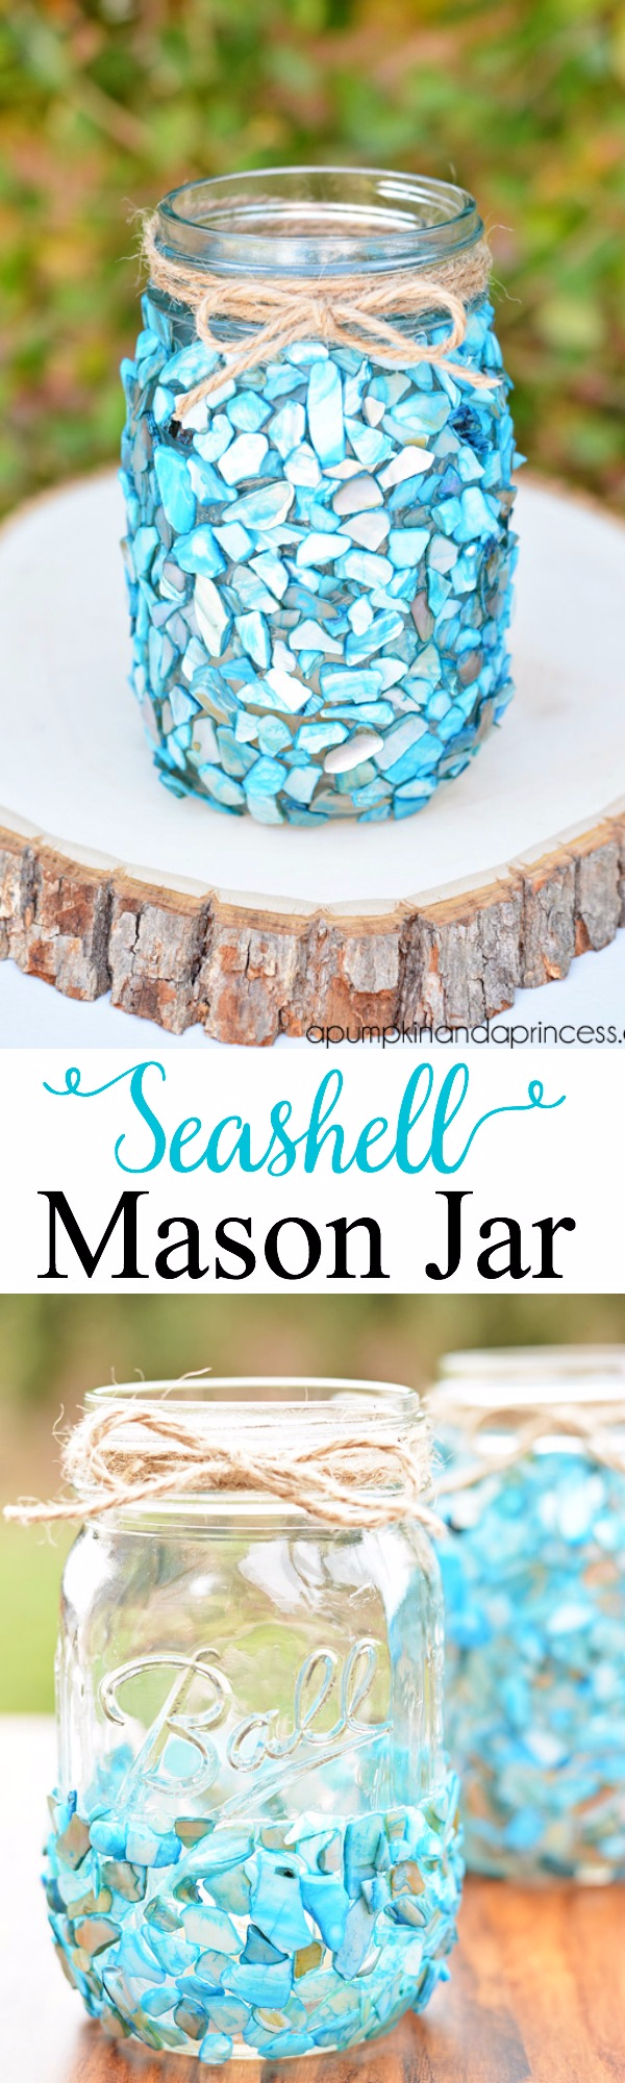 DIY Teen Room Decor Ideas for Girls | Beach Inspired Mason Jar Display | Cool Bedroom Decor, Wall Art & Signs, Crafts, Bedding, Fun Do It Yourself Projects and Room Ideas for Small Spaces #teencrafts #roomdecor #teens #diy